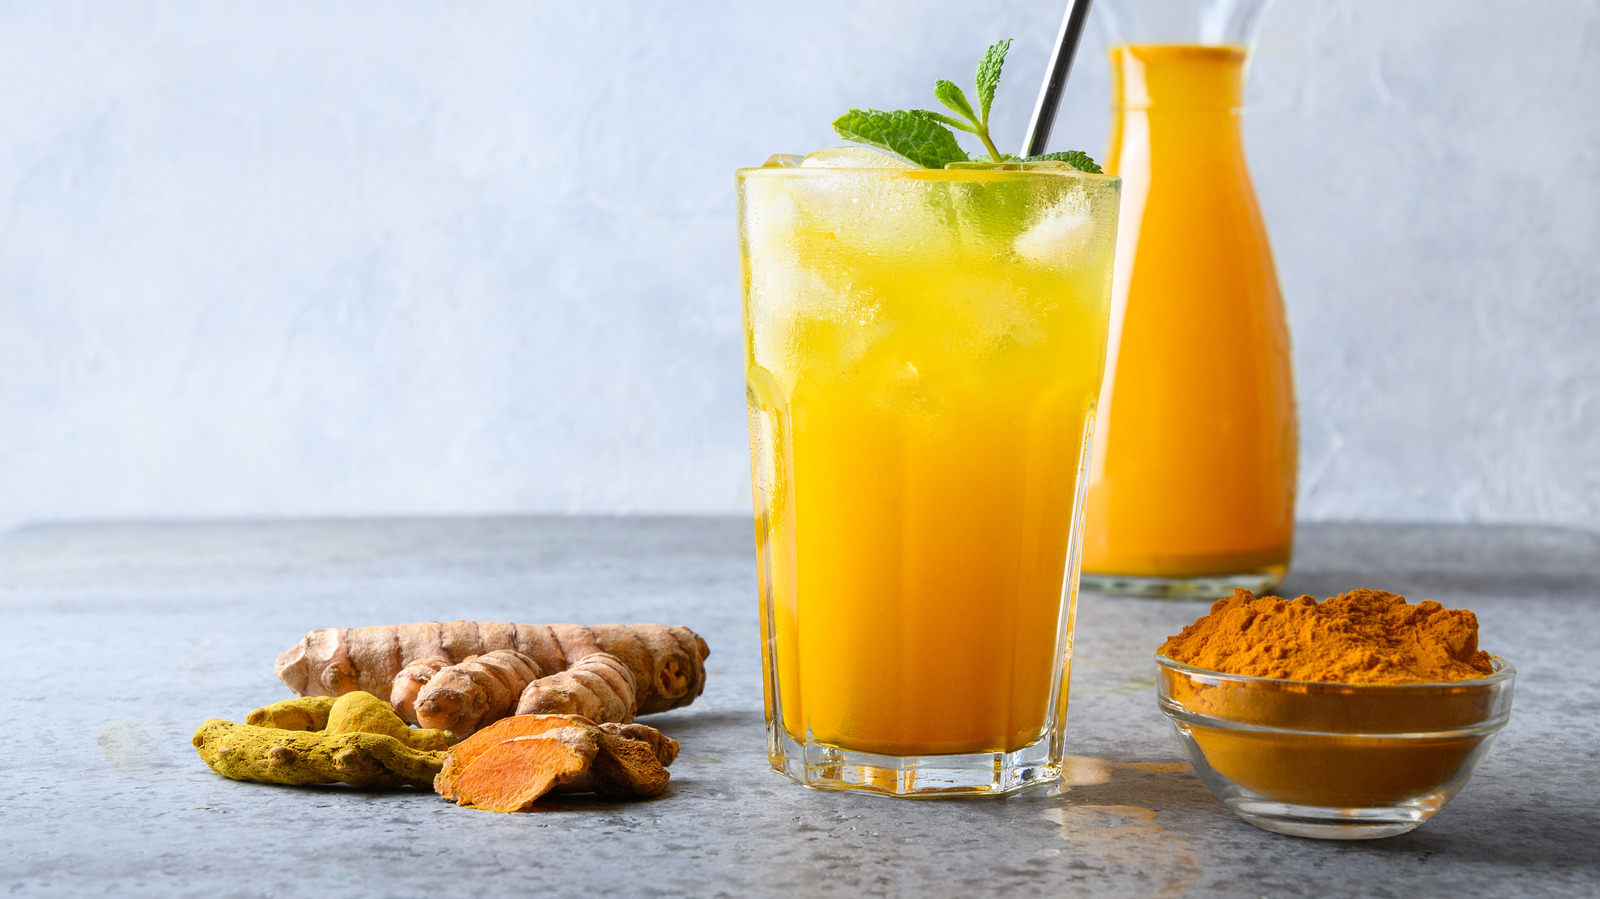 Everything You Need To Know About The Jamu Juice Trend